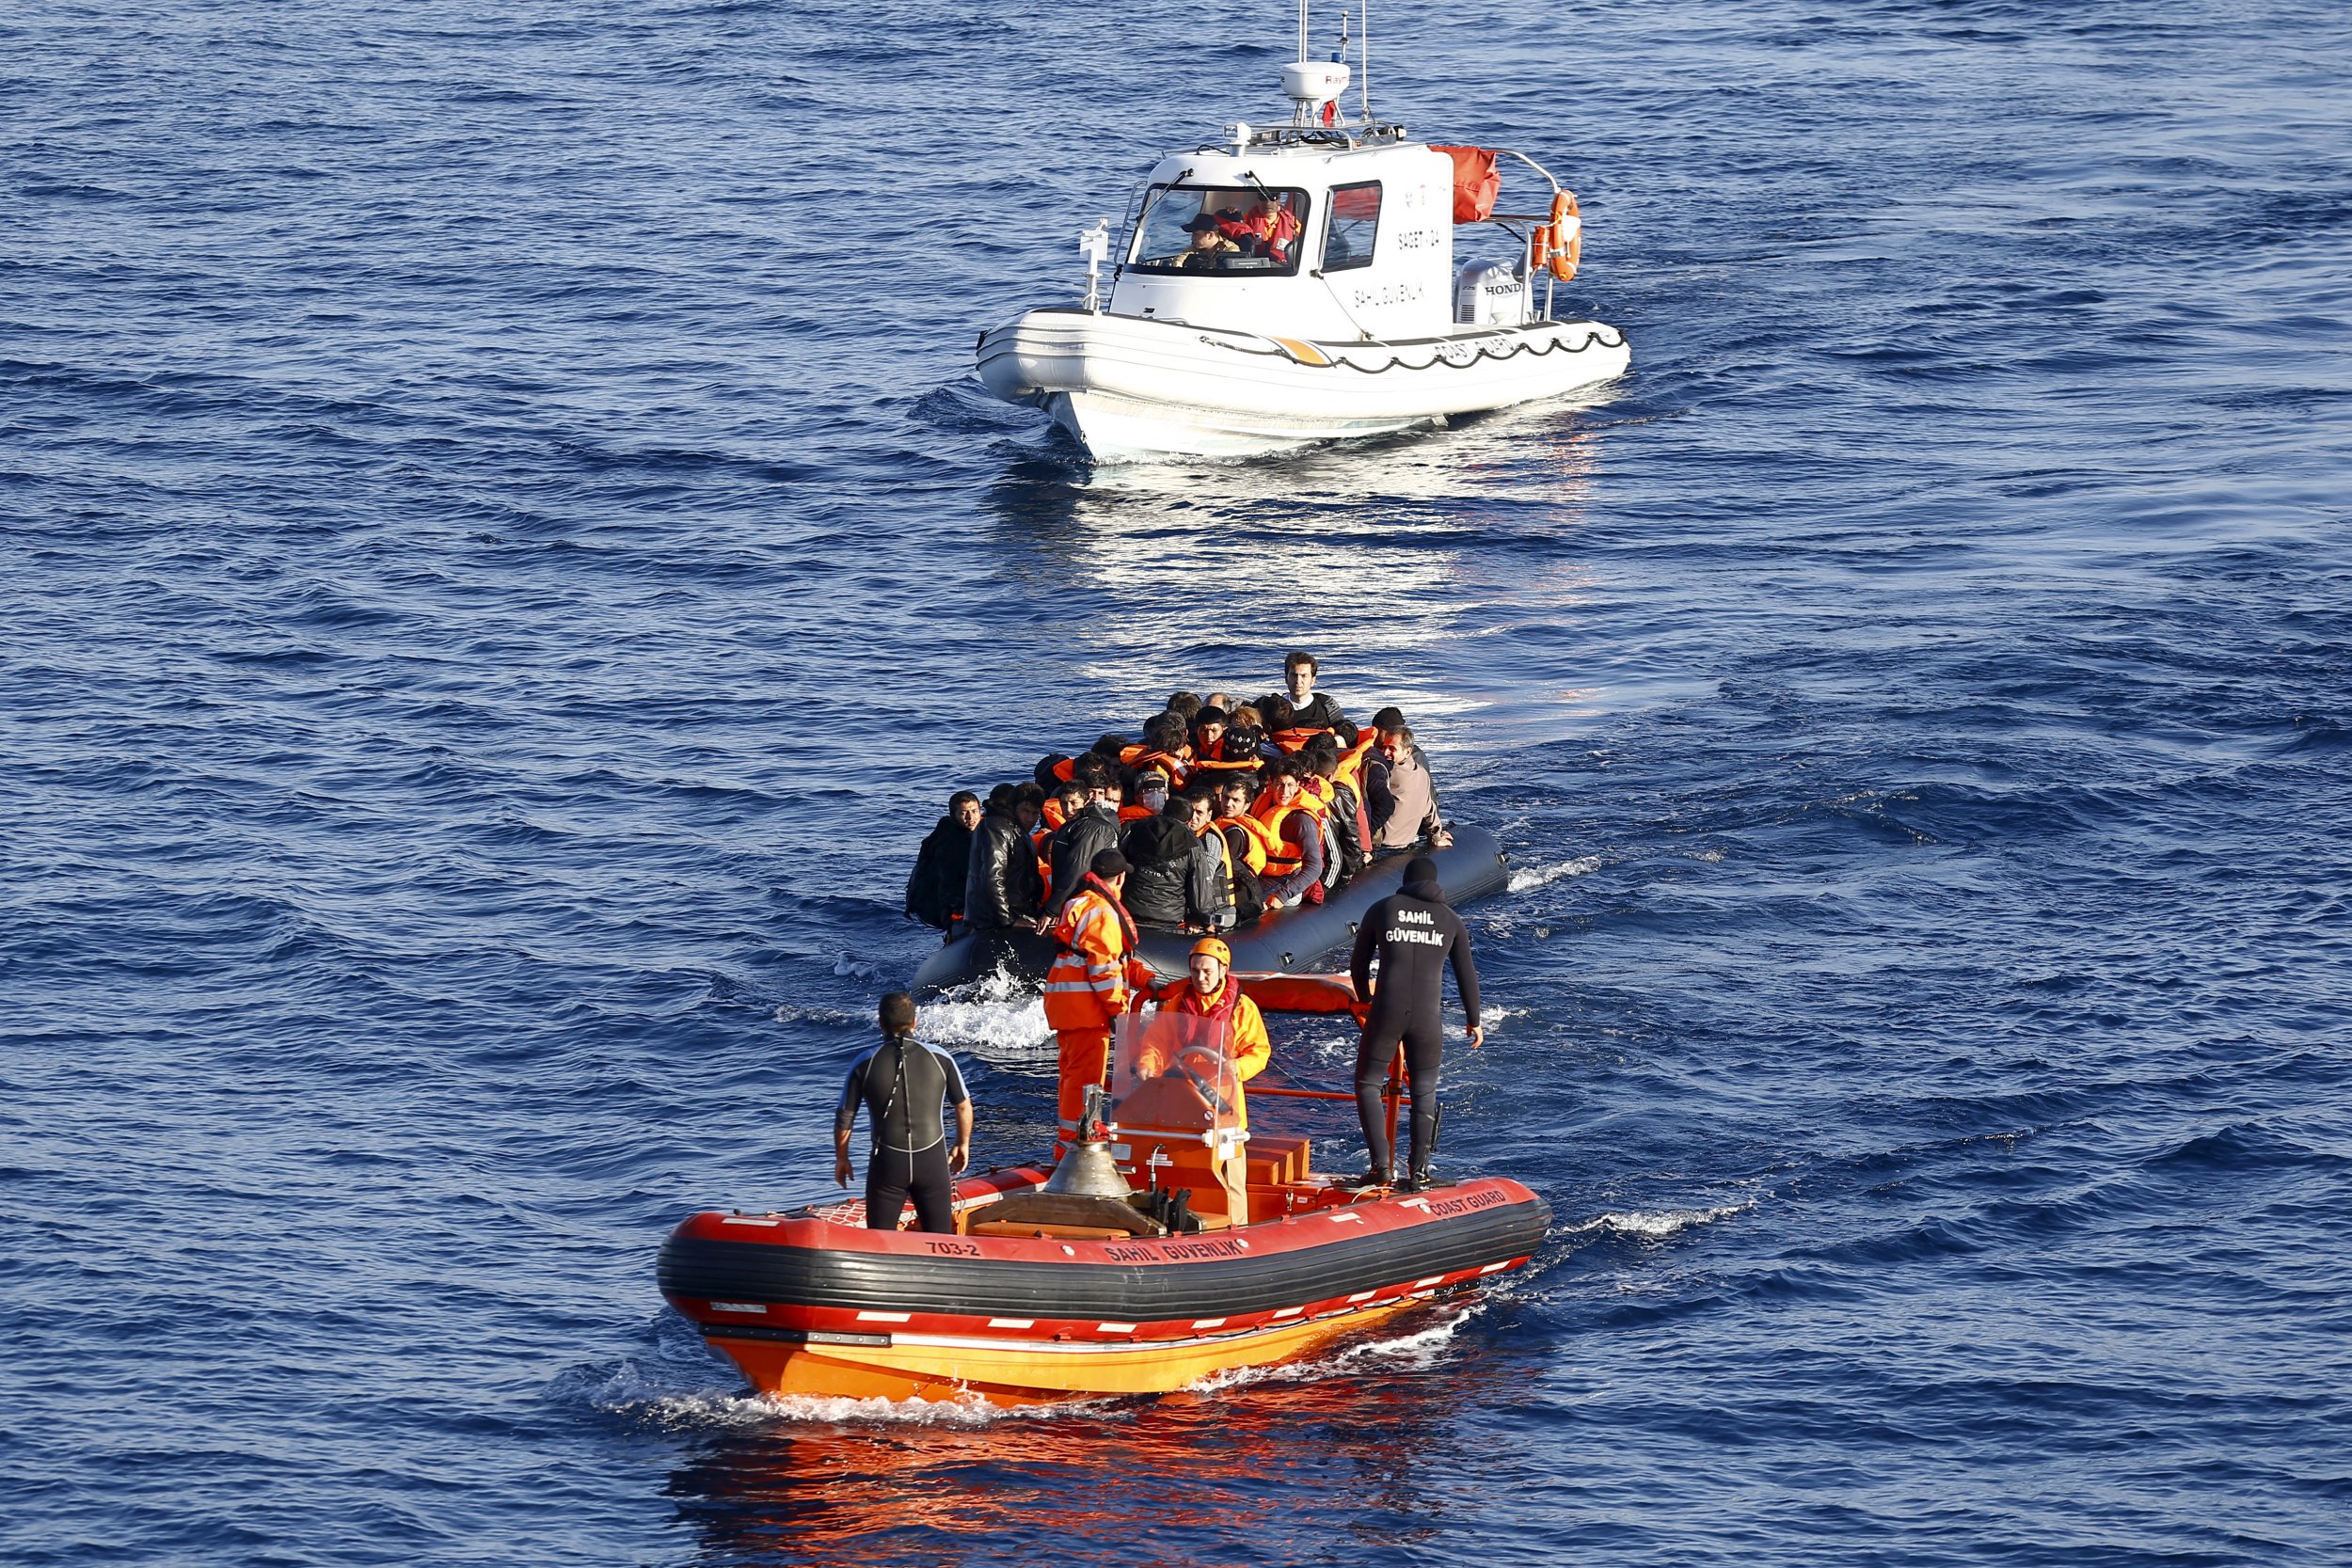 Five drown trying to reach Greece from Turkey